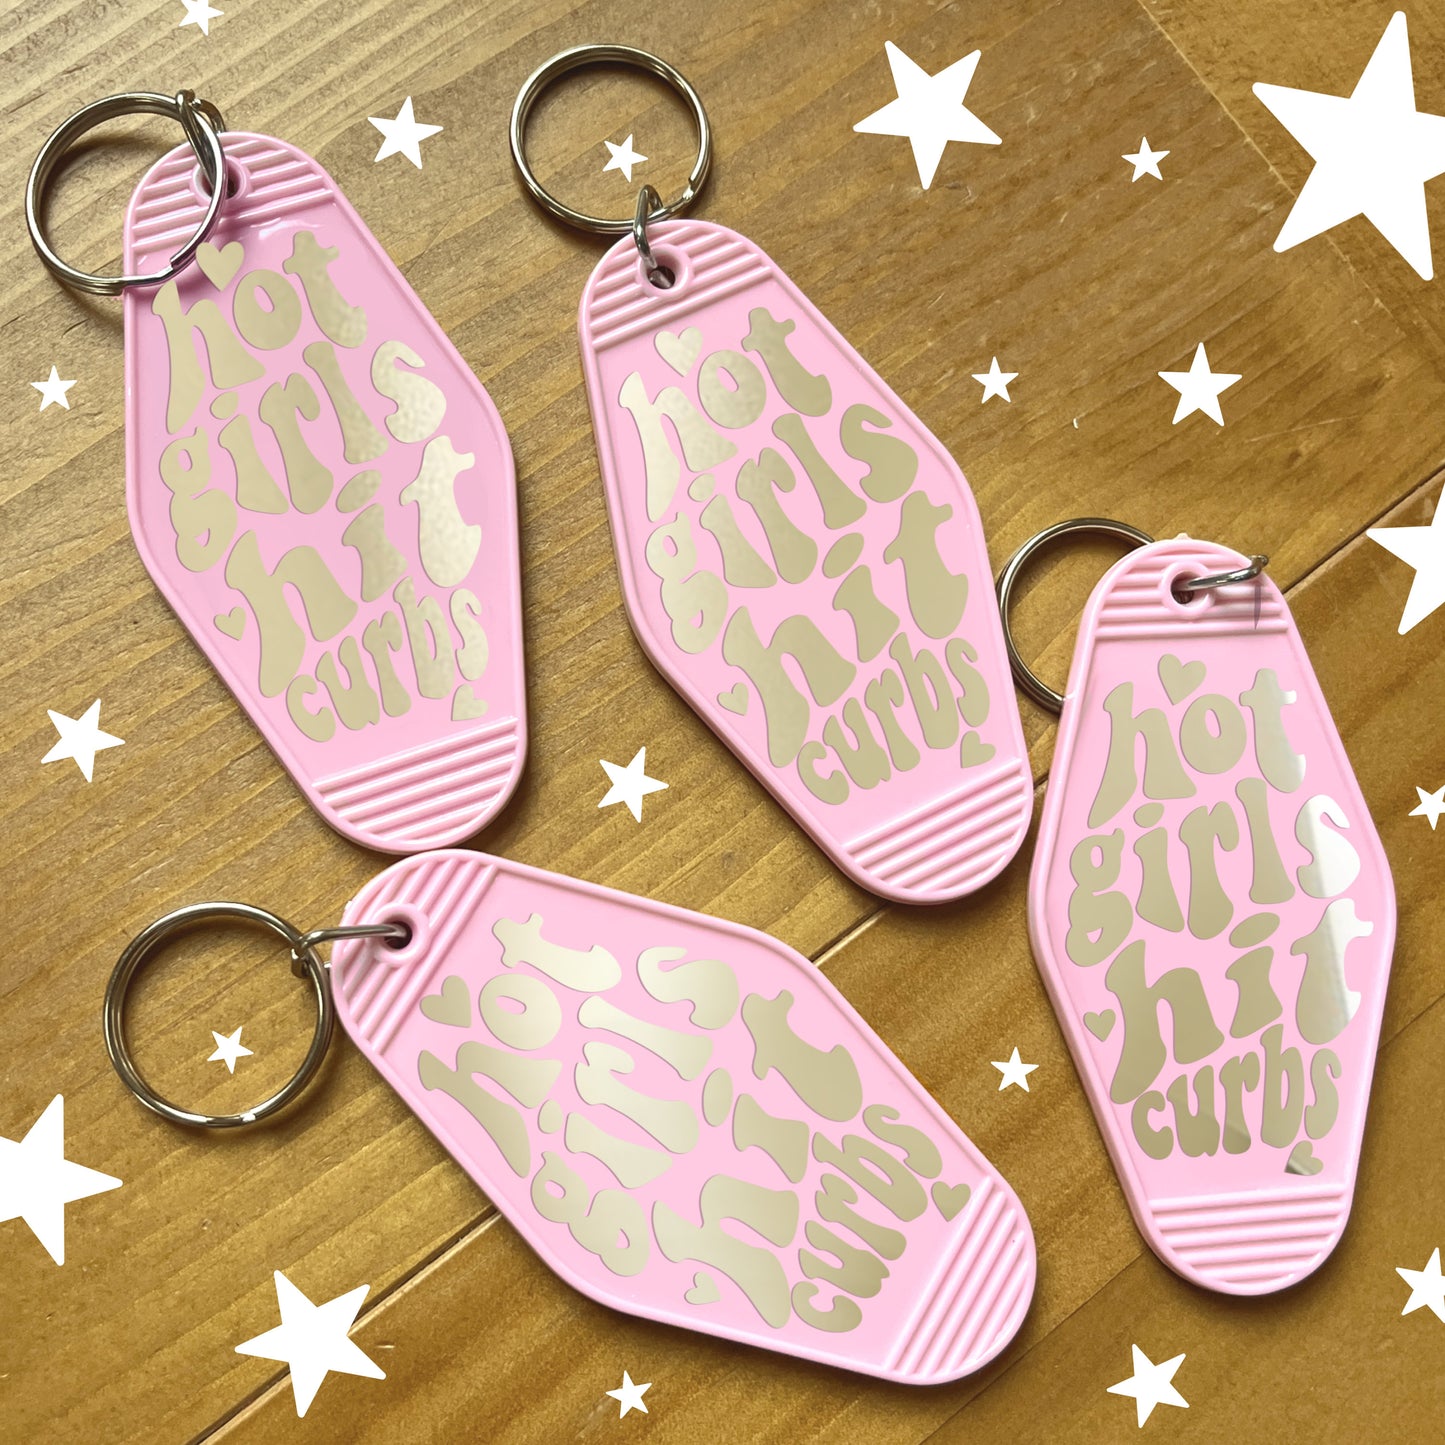 Hot Girls Hit Curbs Keychain | Pink Motel Style Keychains, Passed Driving Test, Driving Test Gift, First Car Gift, Car Gift